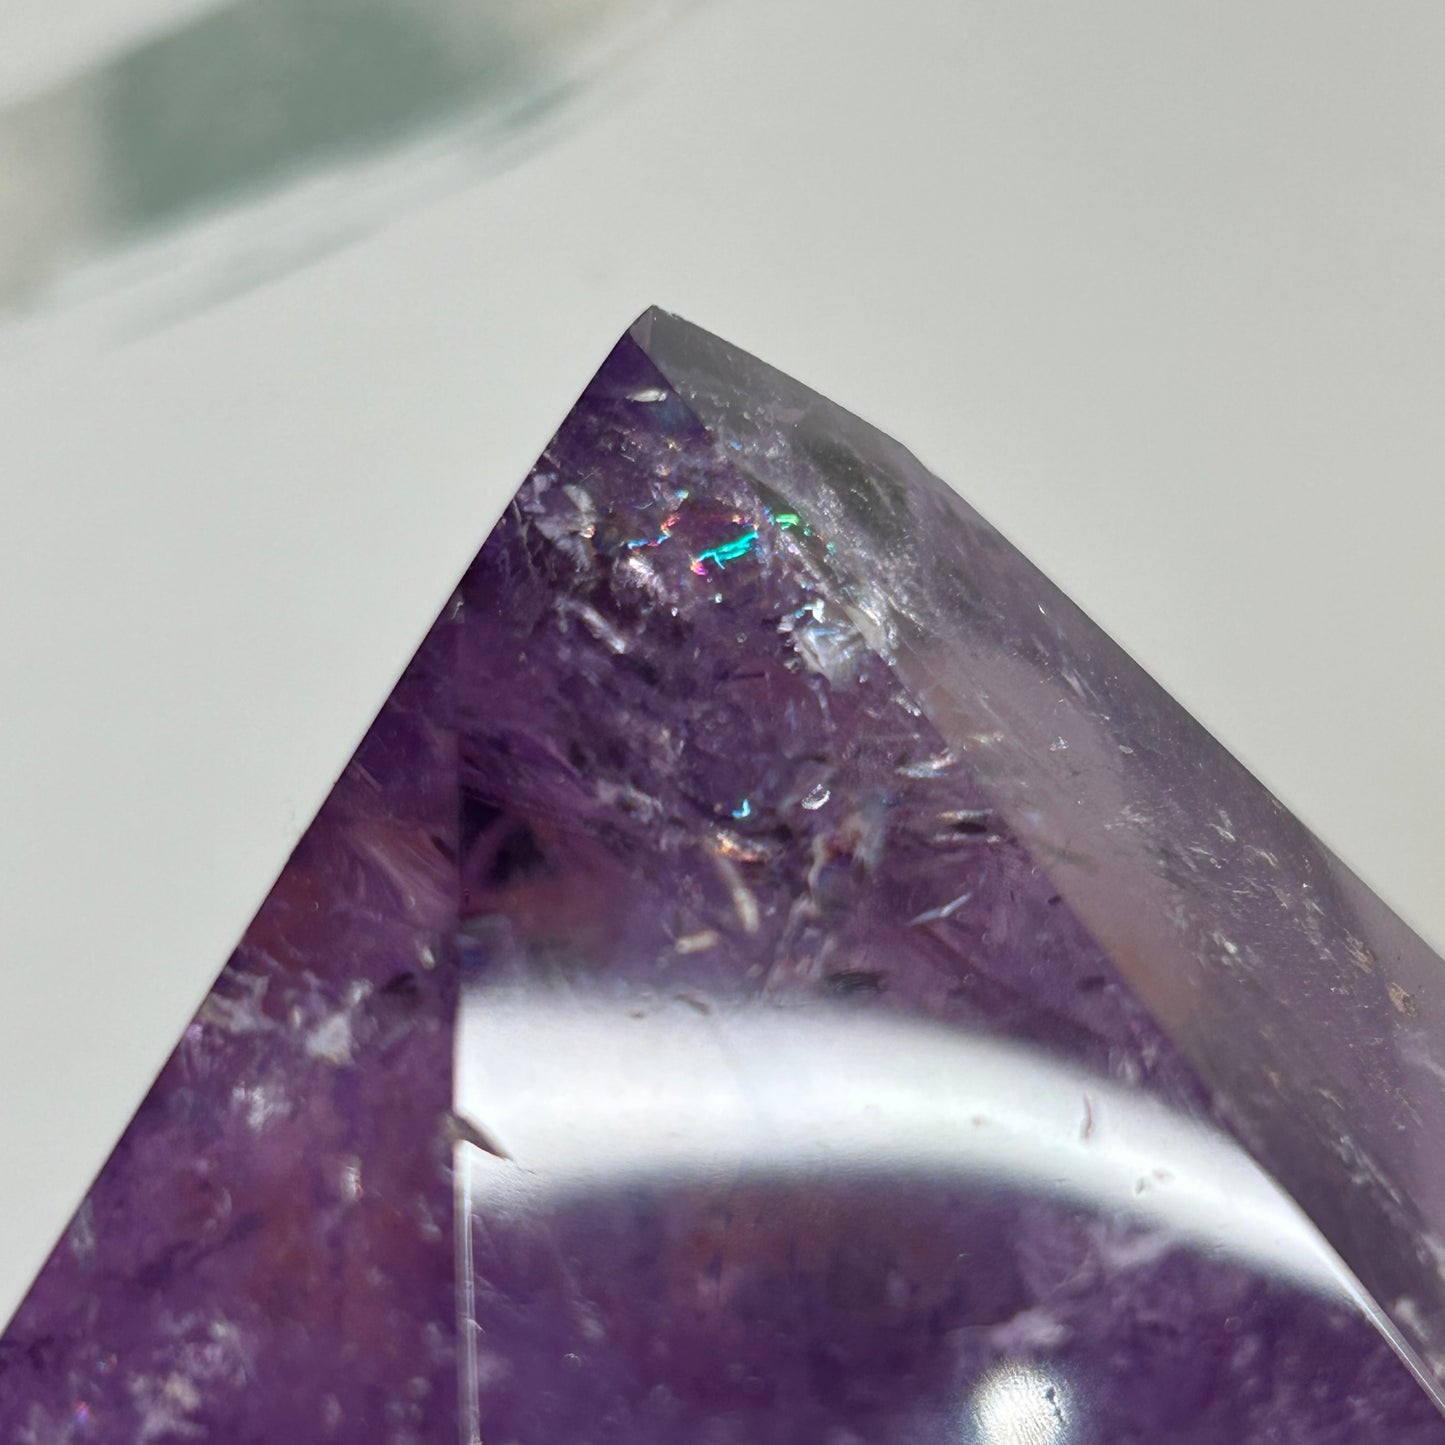 Amethyst Polished Top Point